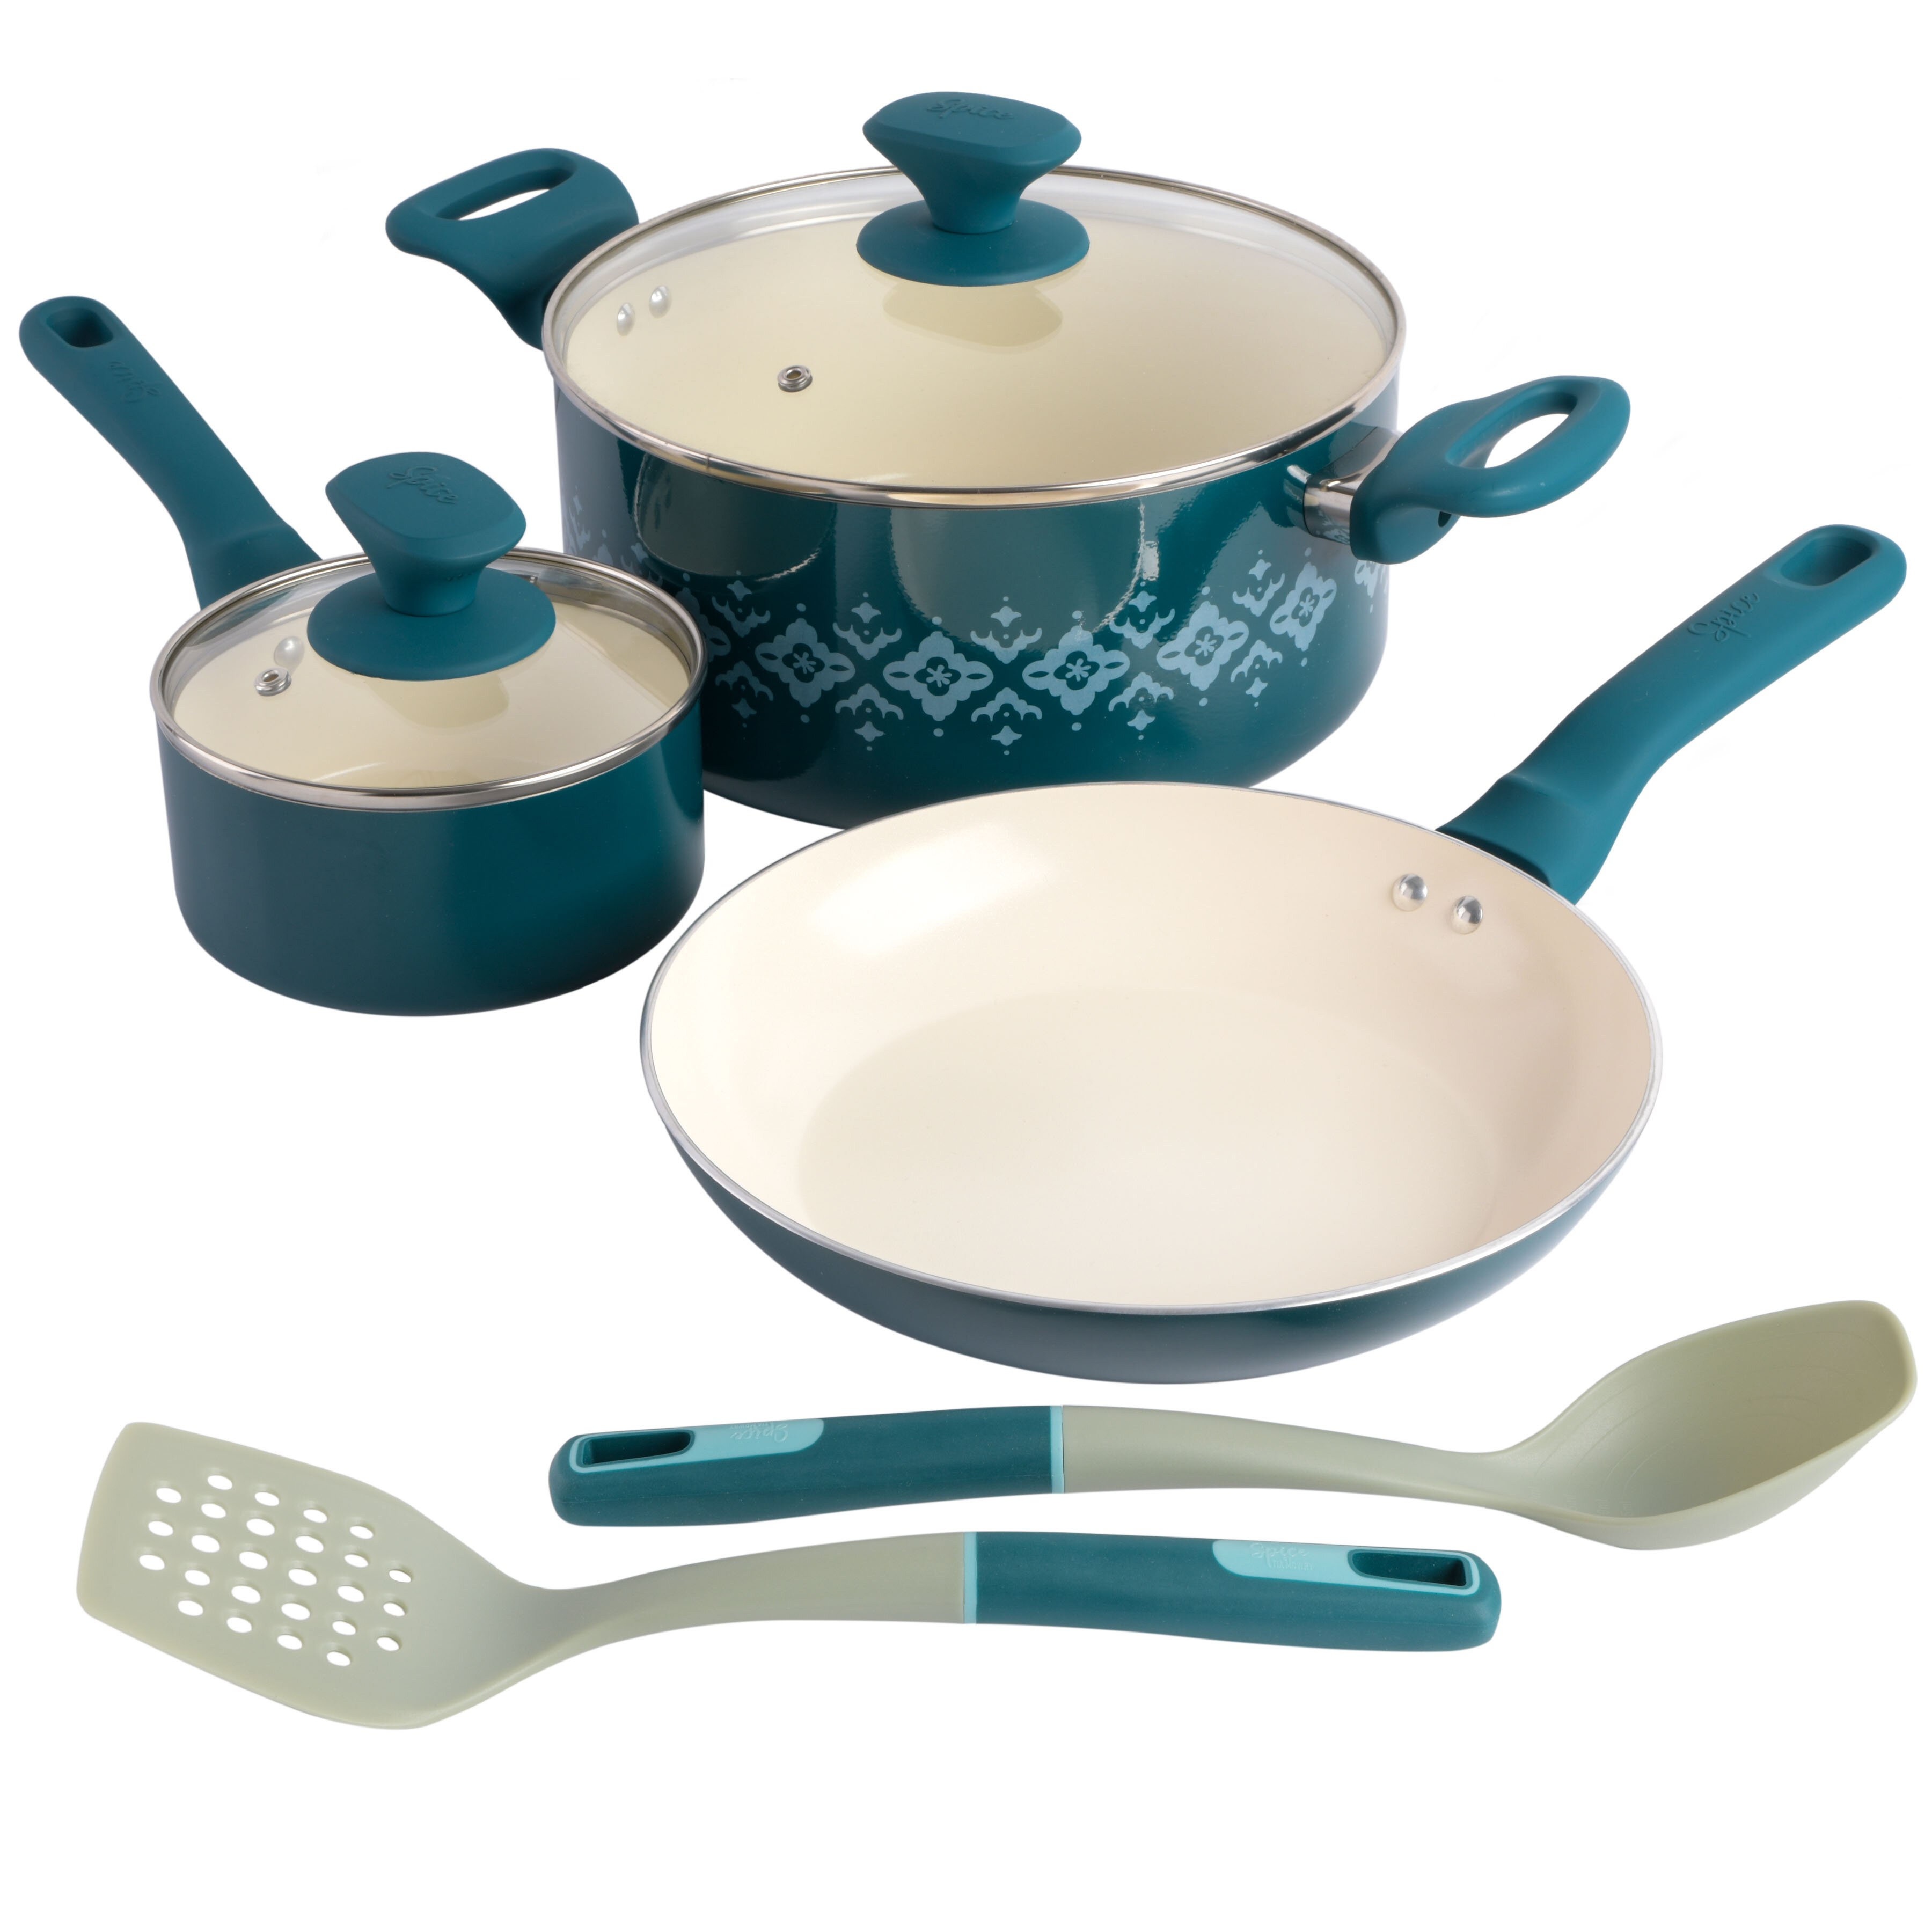 GreenLife Nylon & Wood Cooking Utensils with Ceramic Crock, 7-Piece Set |  Turquoise